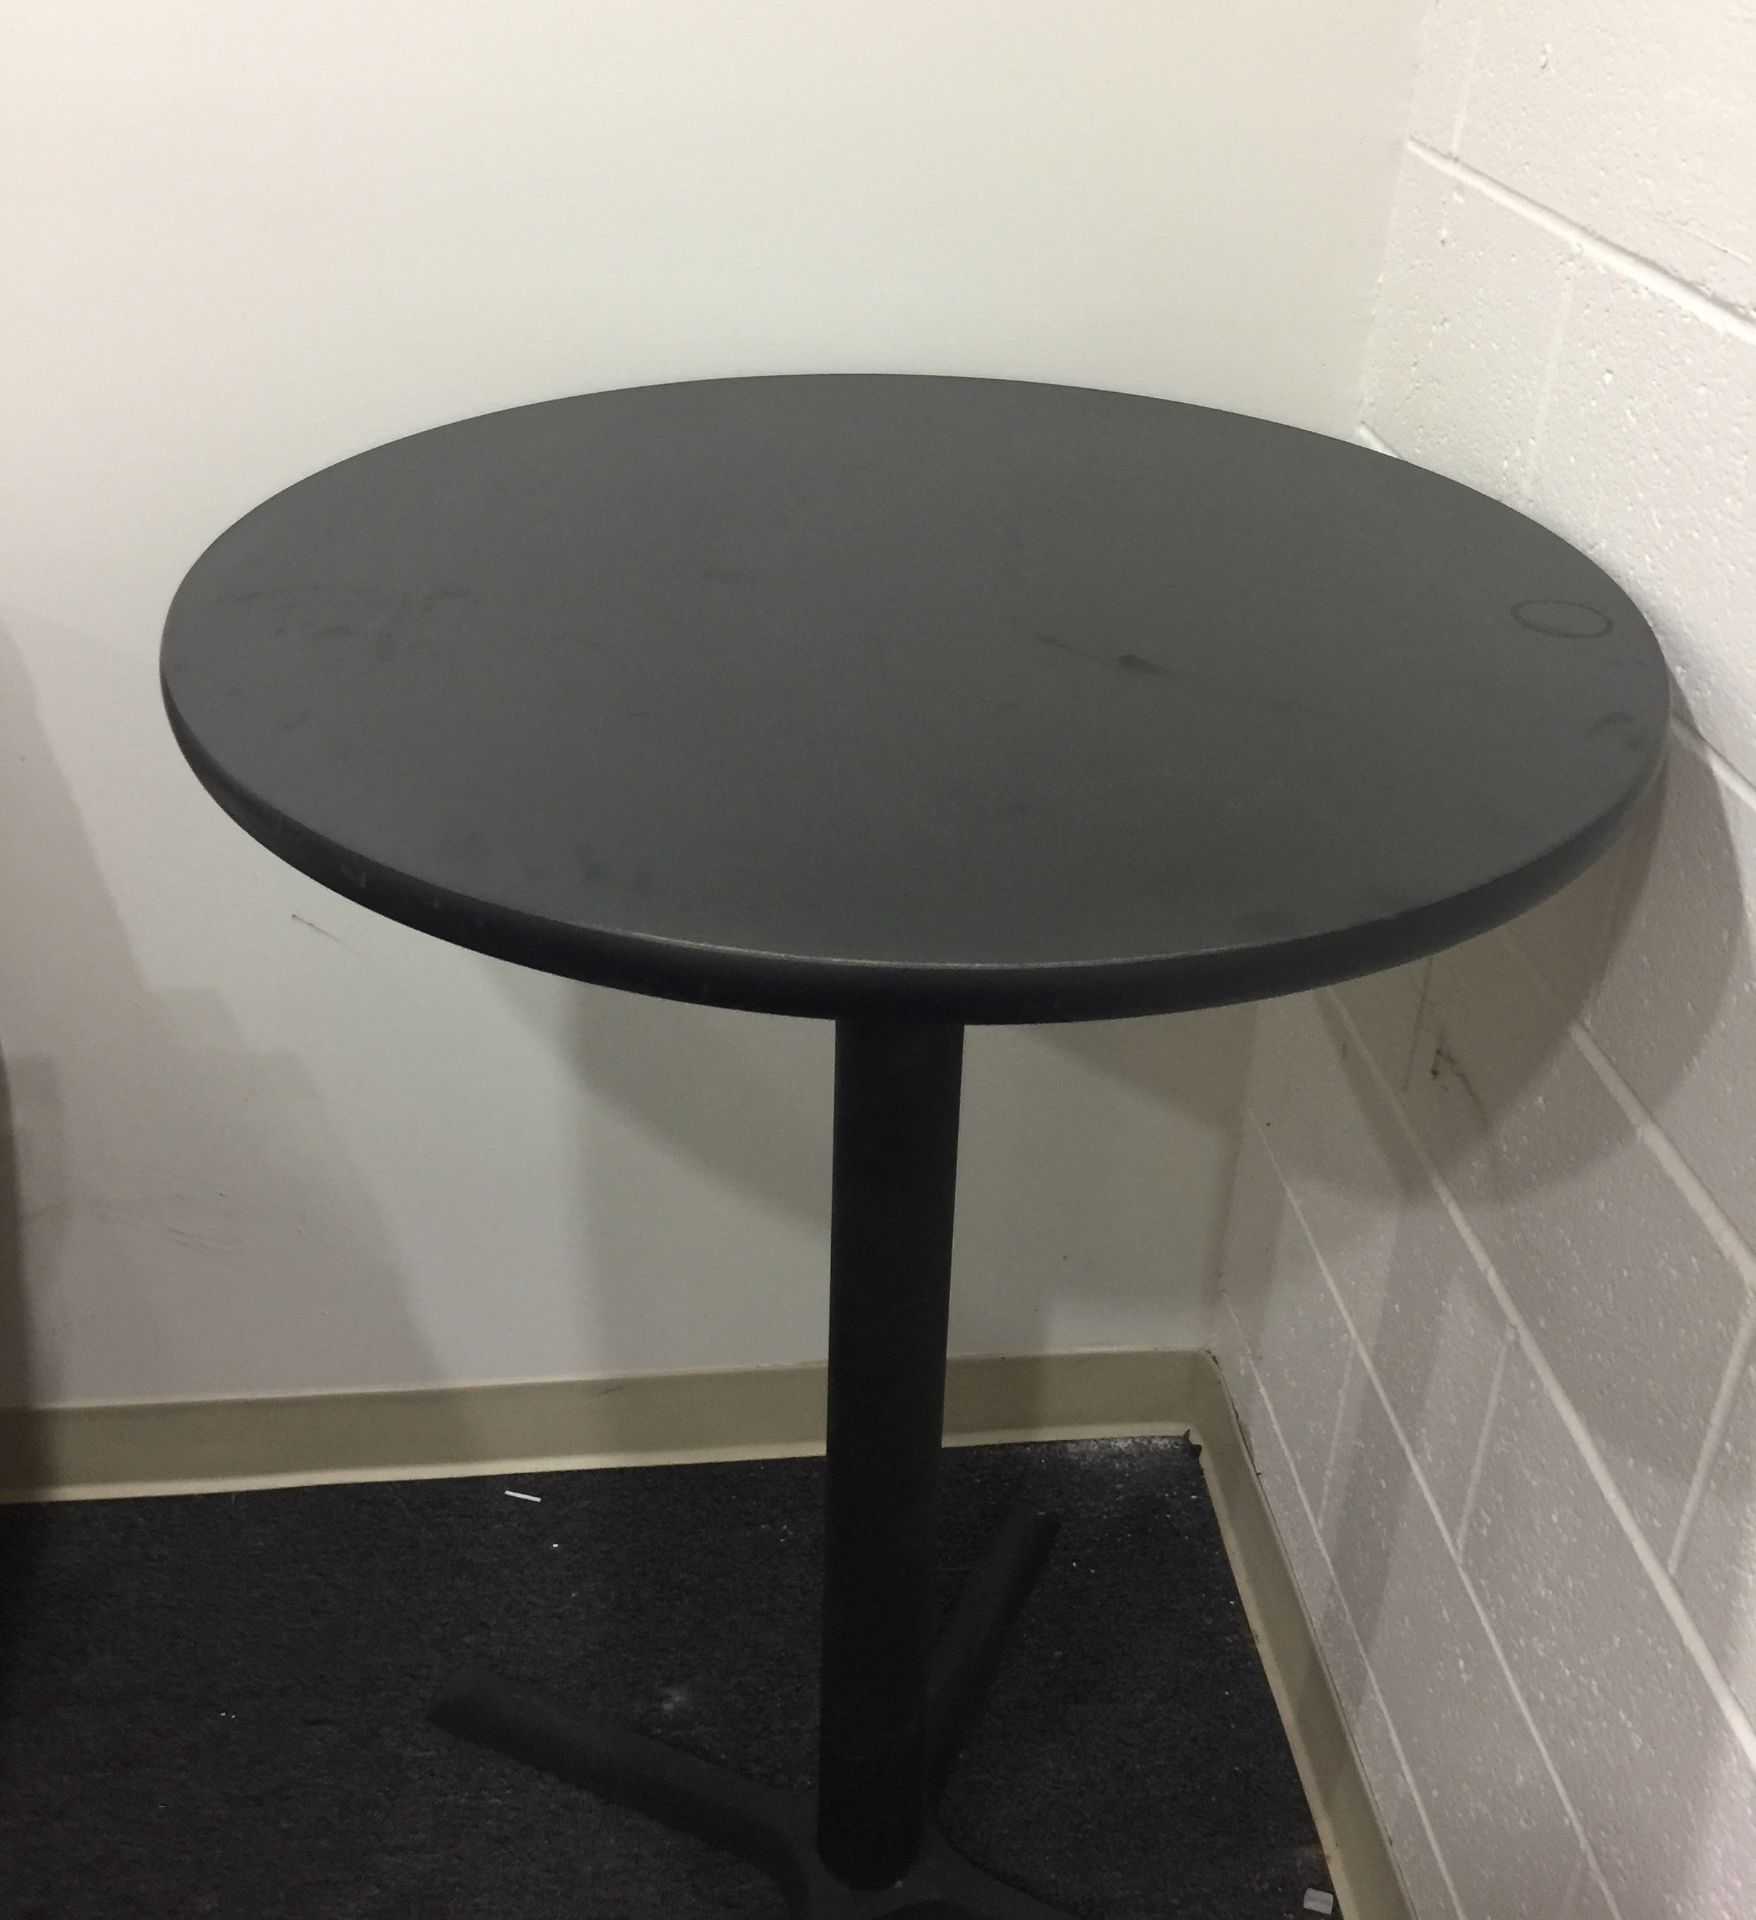 4 FT STANDING COFFEE / OFFICE TABLE BLACK ON BLACK - Image 2 of 3